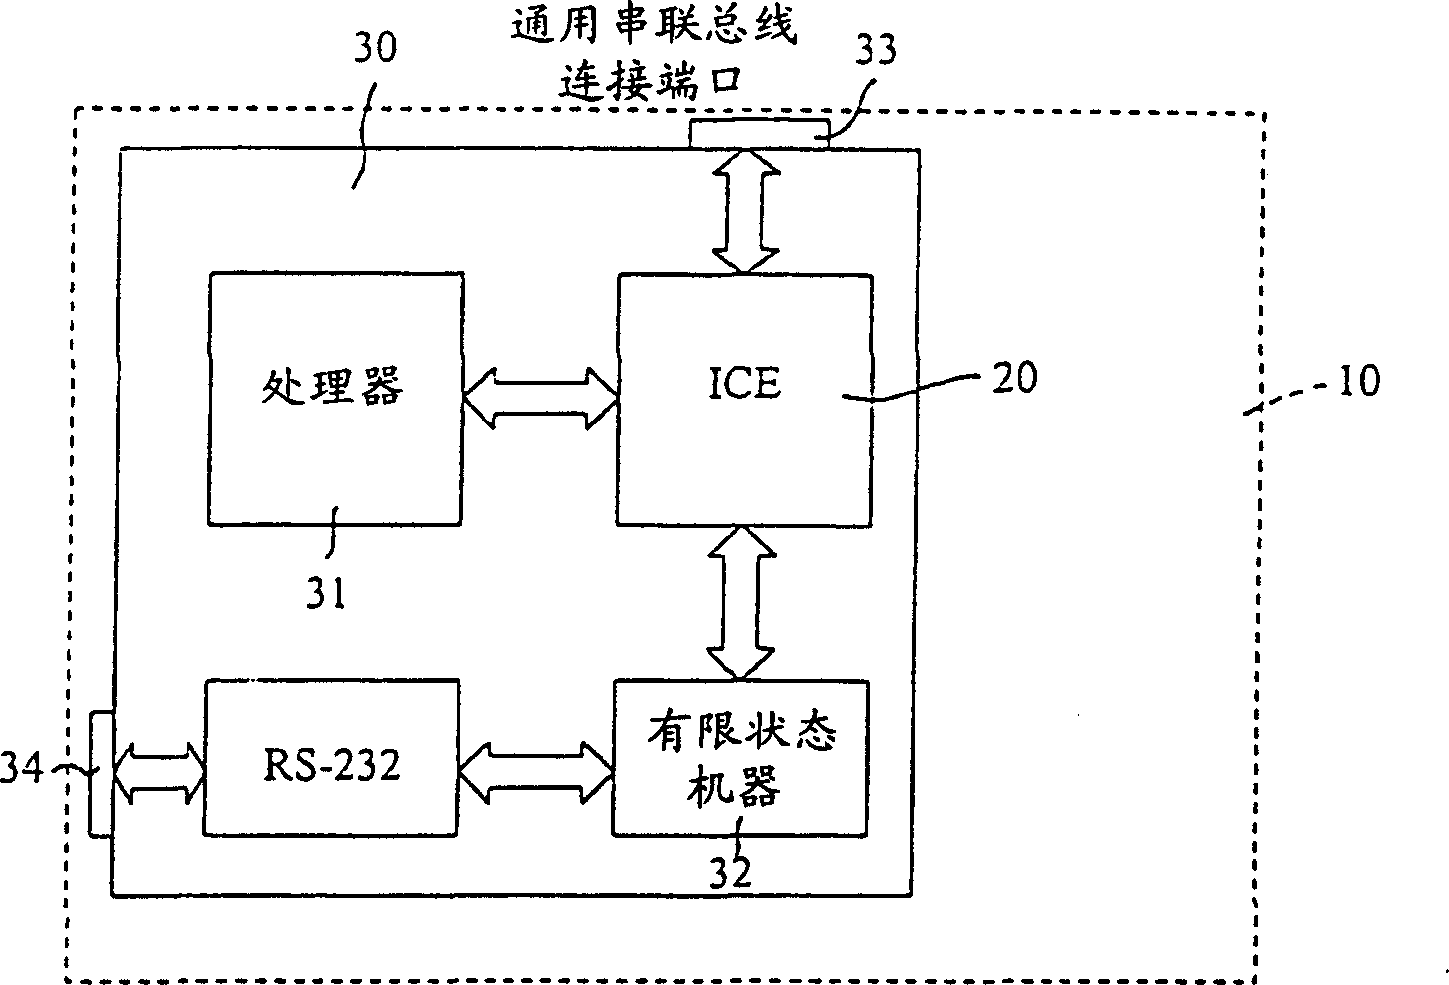 Method and apparatus for applying existing connecting ports of electronic products to debugging